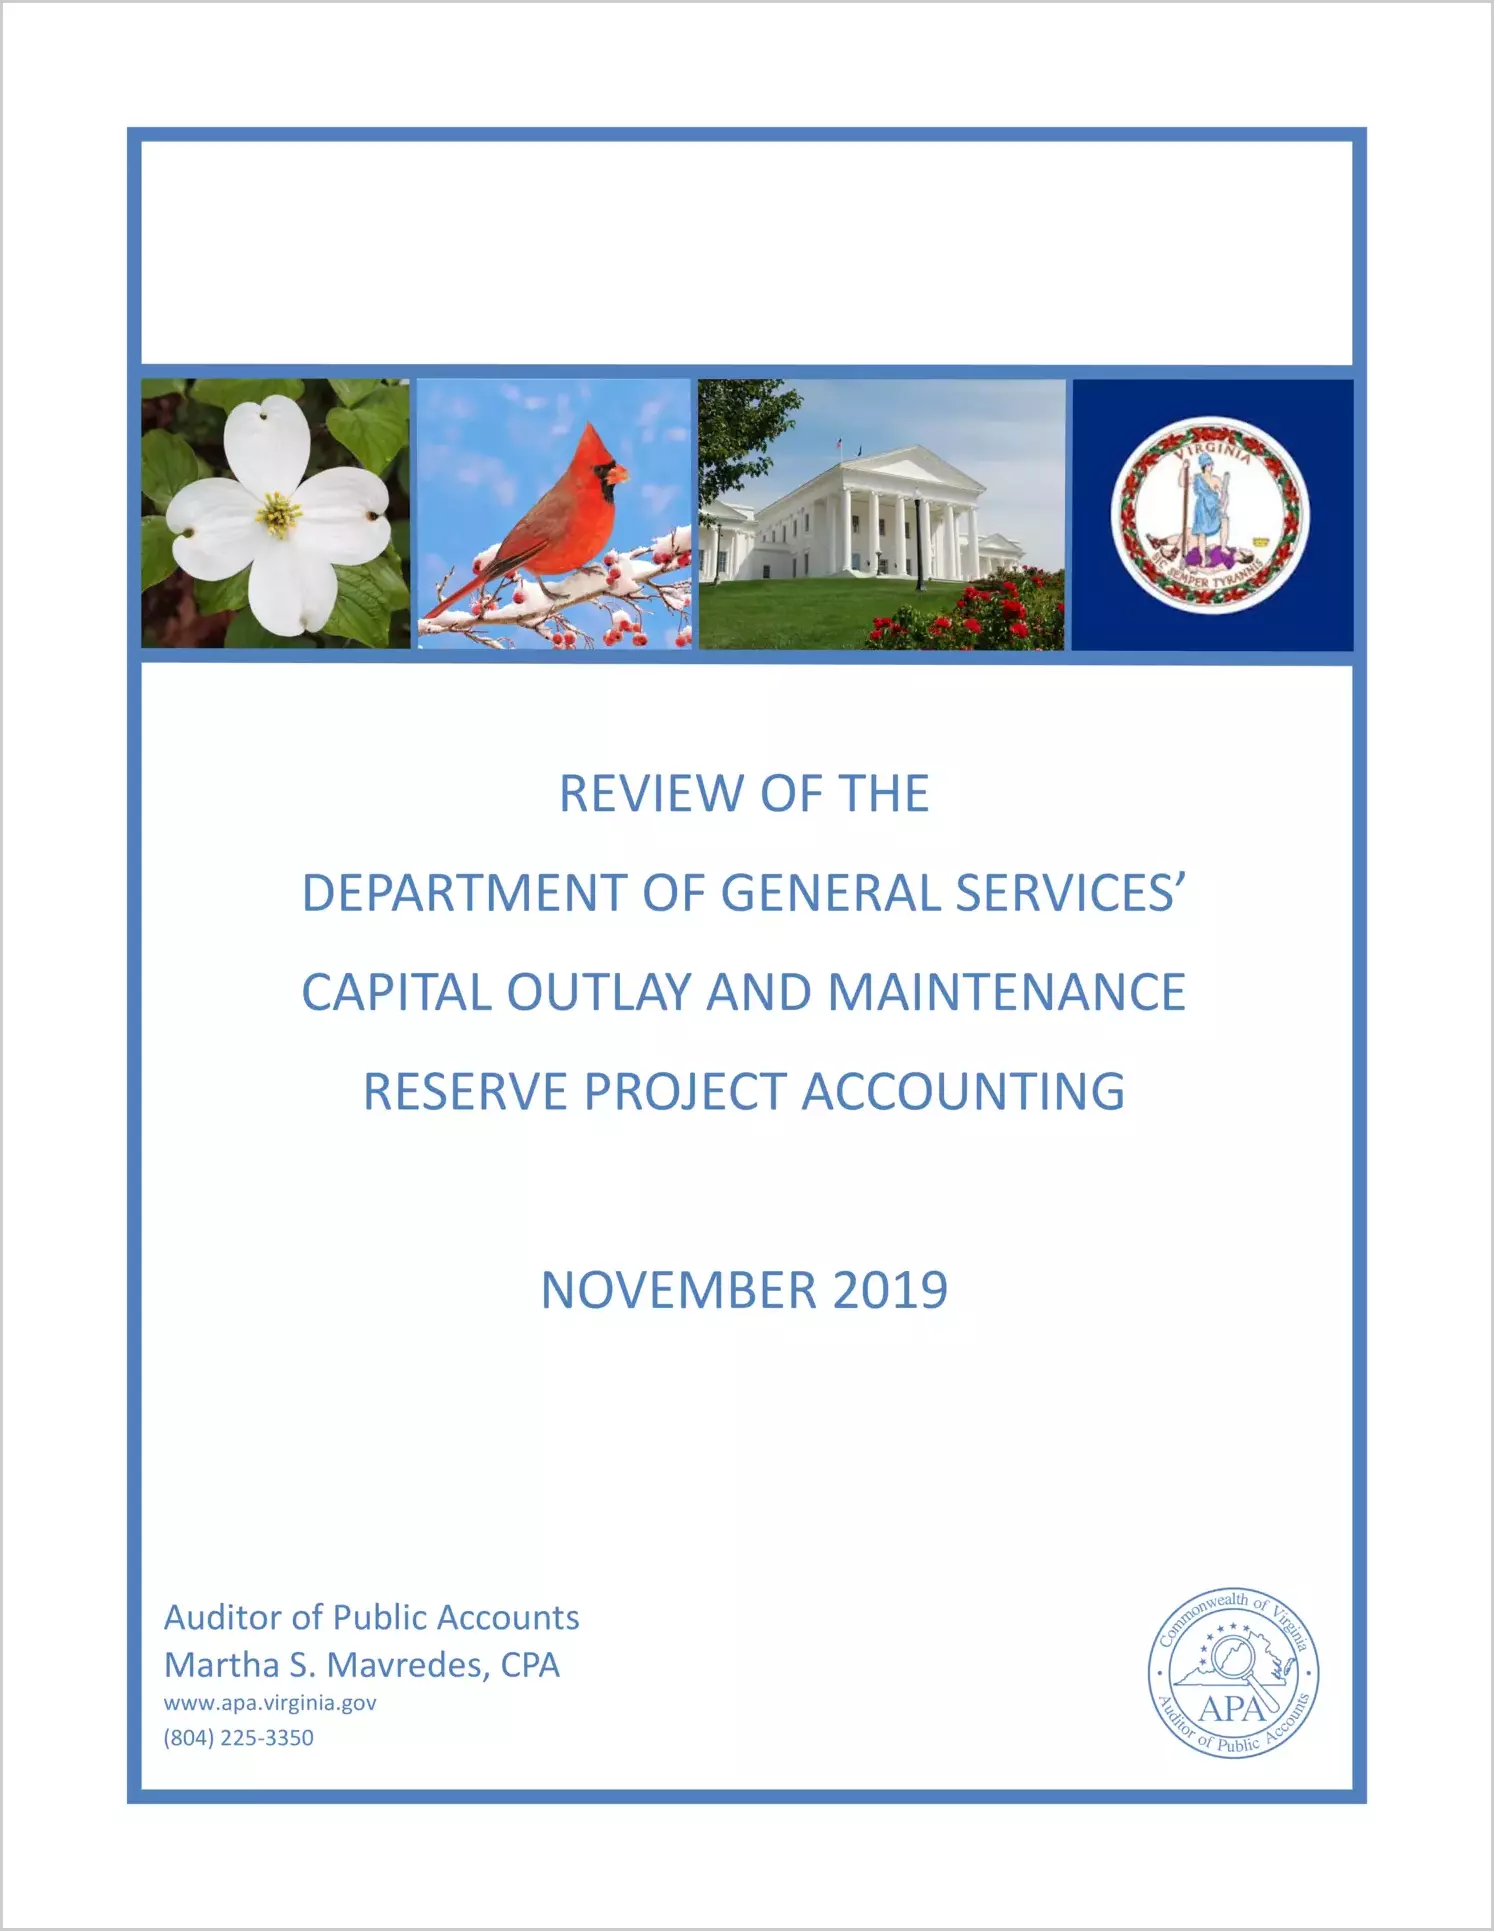 Review of the Department of General Service's Capital Outlay and Maintenance Reserve Project Accounting November 2019